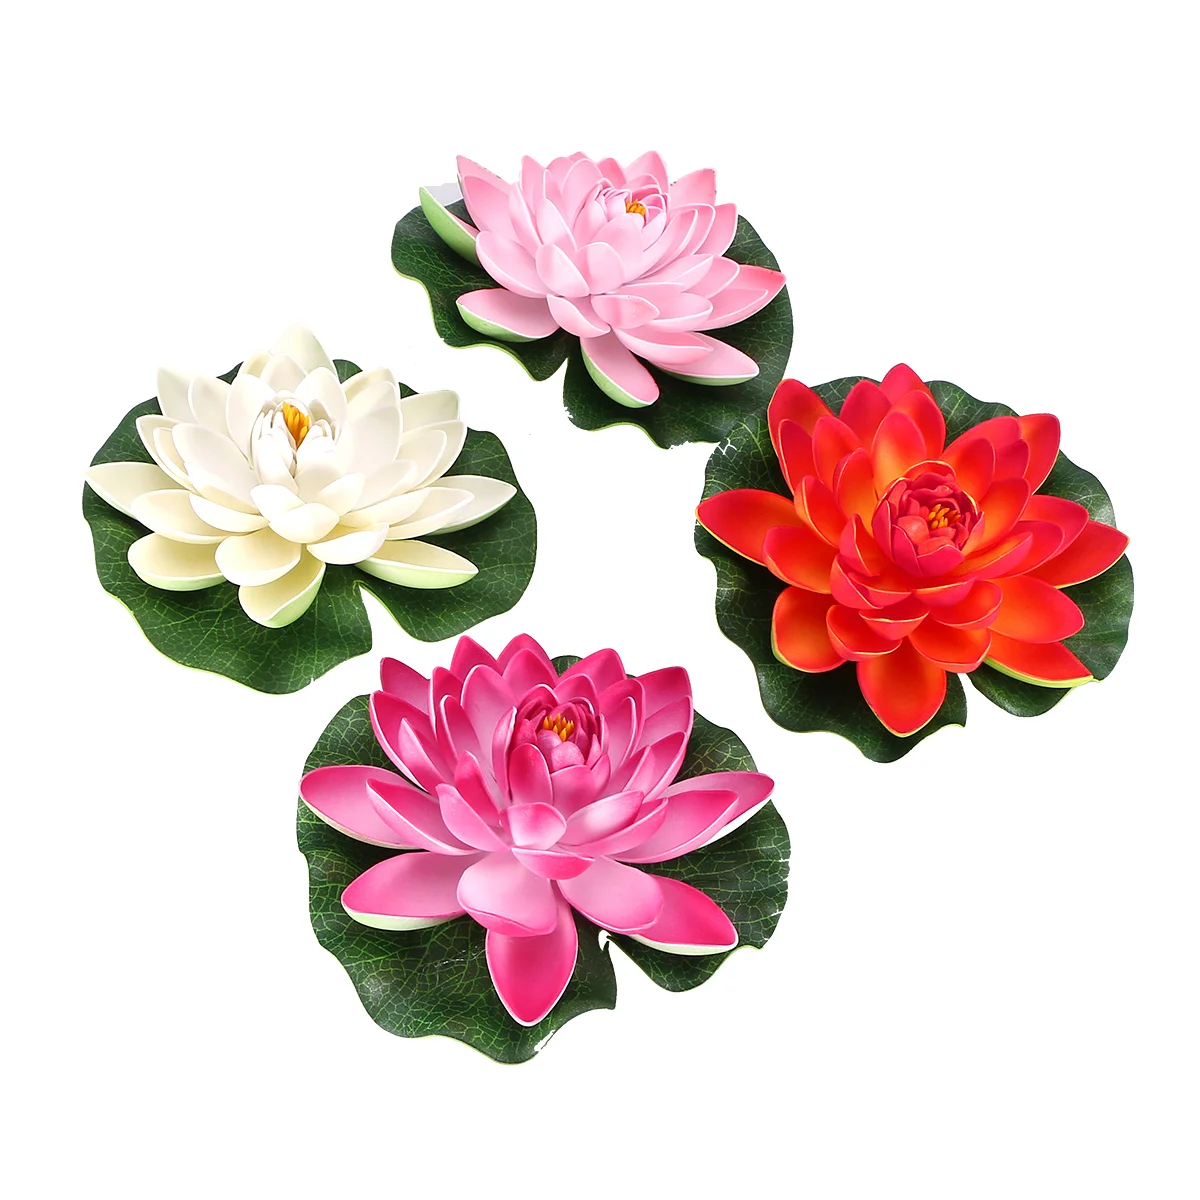 6x Artificial Floating Flowers Lotus Simulation Fish Tank Pond Water Lily Lotus 